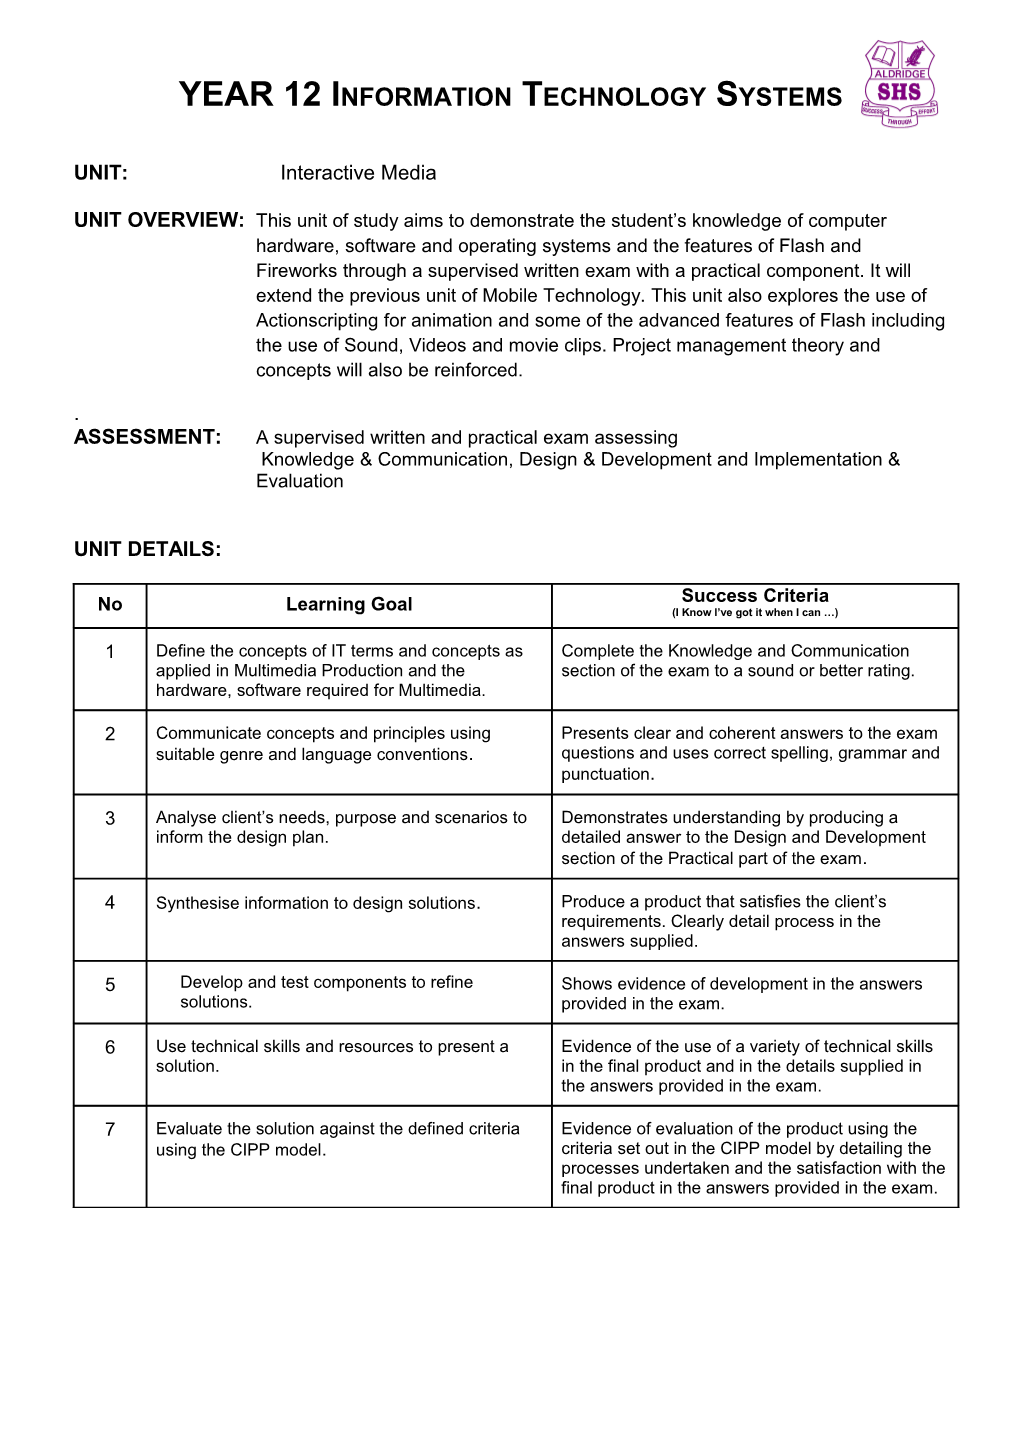 ASSESSMENT:A Supervised Written and Practical Exam Assessing